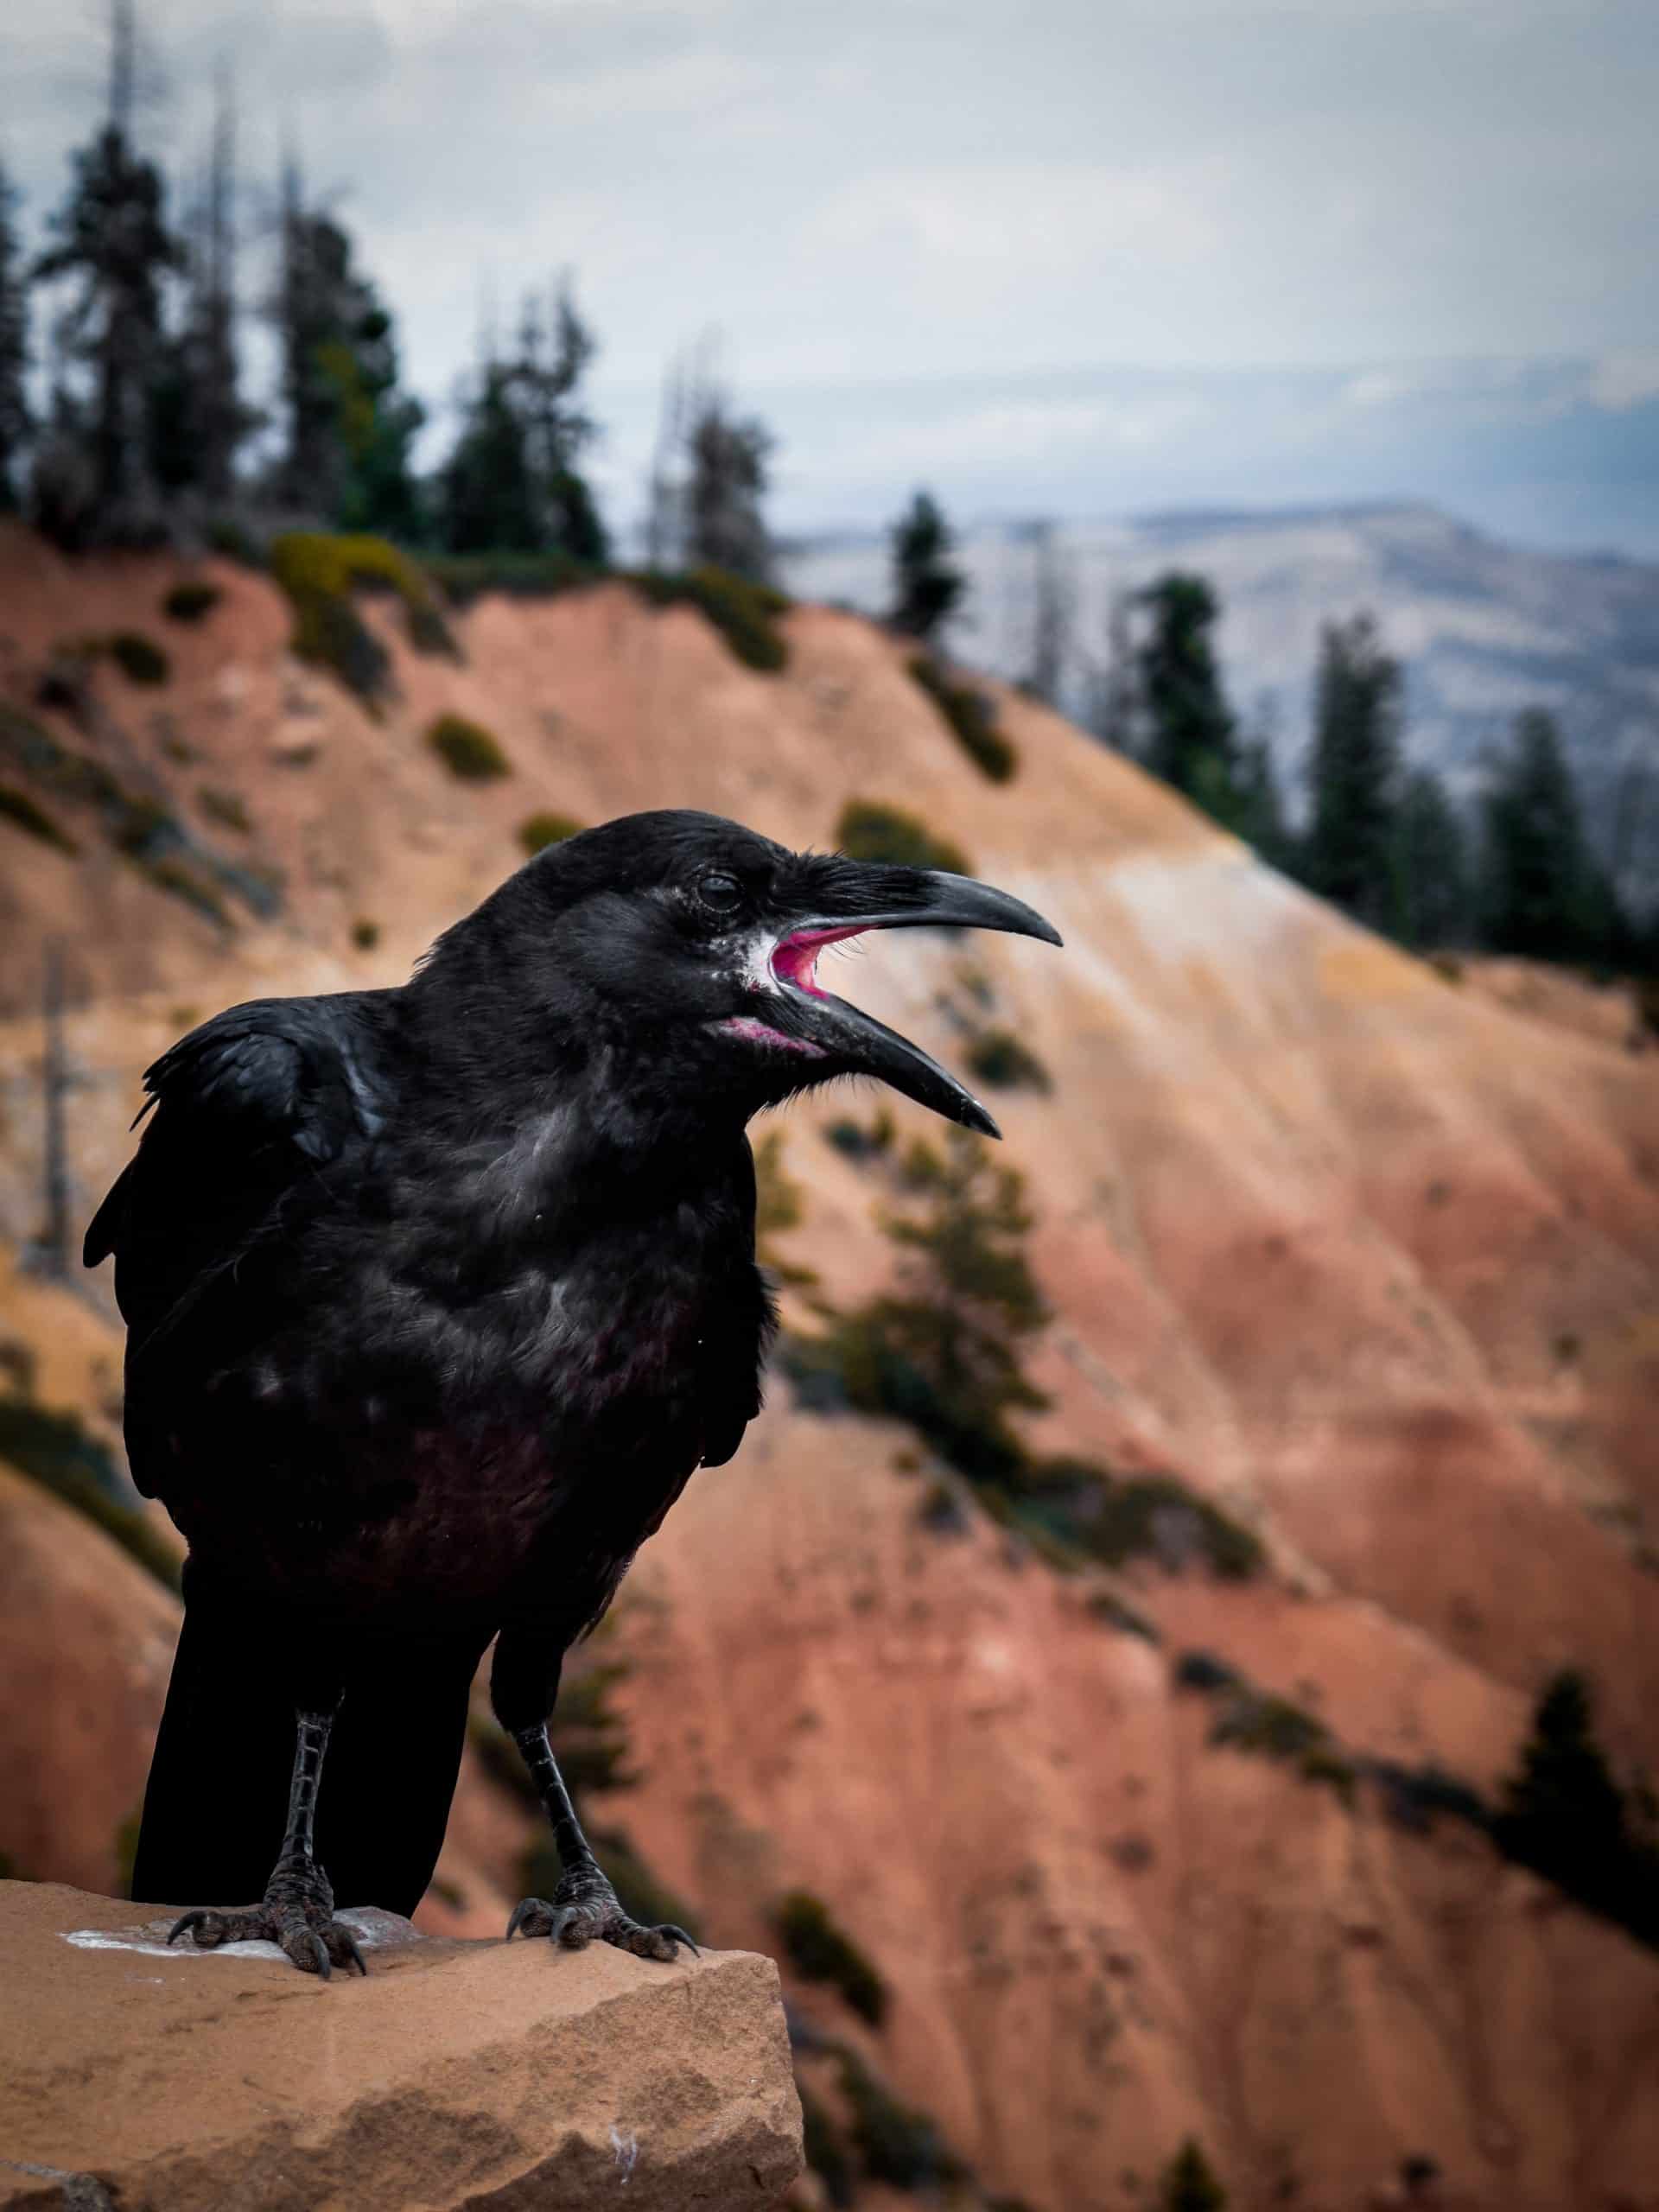 crow with mouth open calling